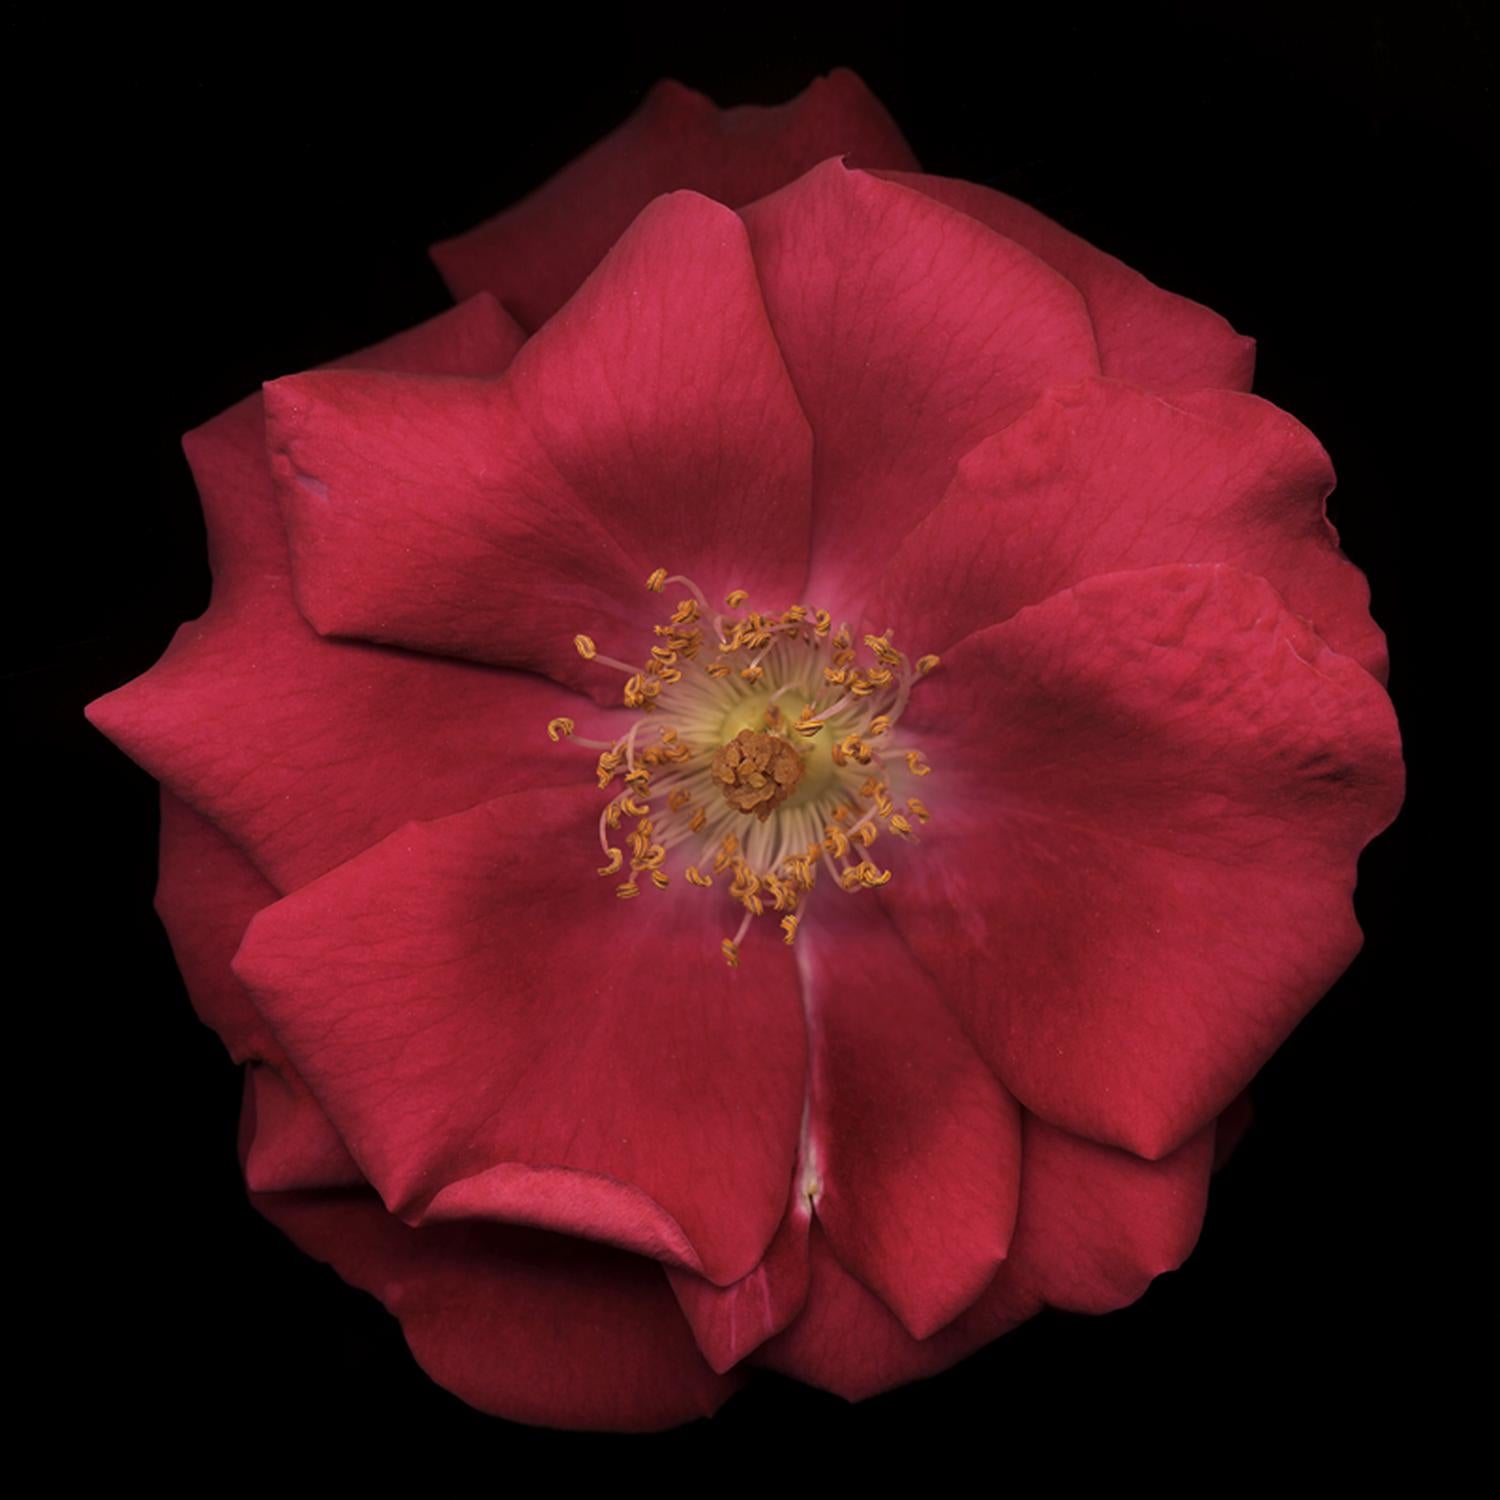 Chad Kleitsch Color Photograph - Untitled Flower # 05 (30" x 30")